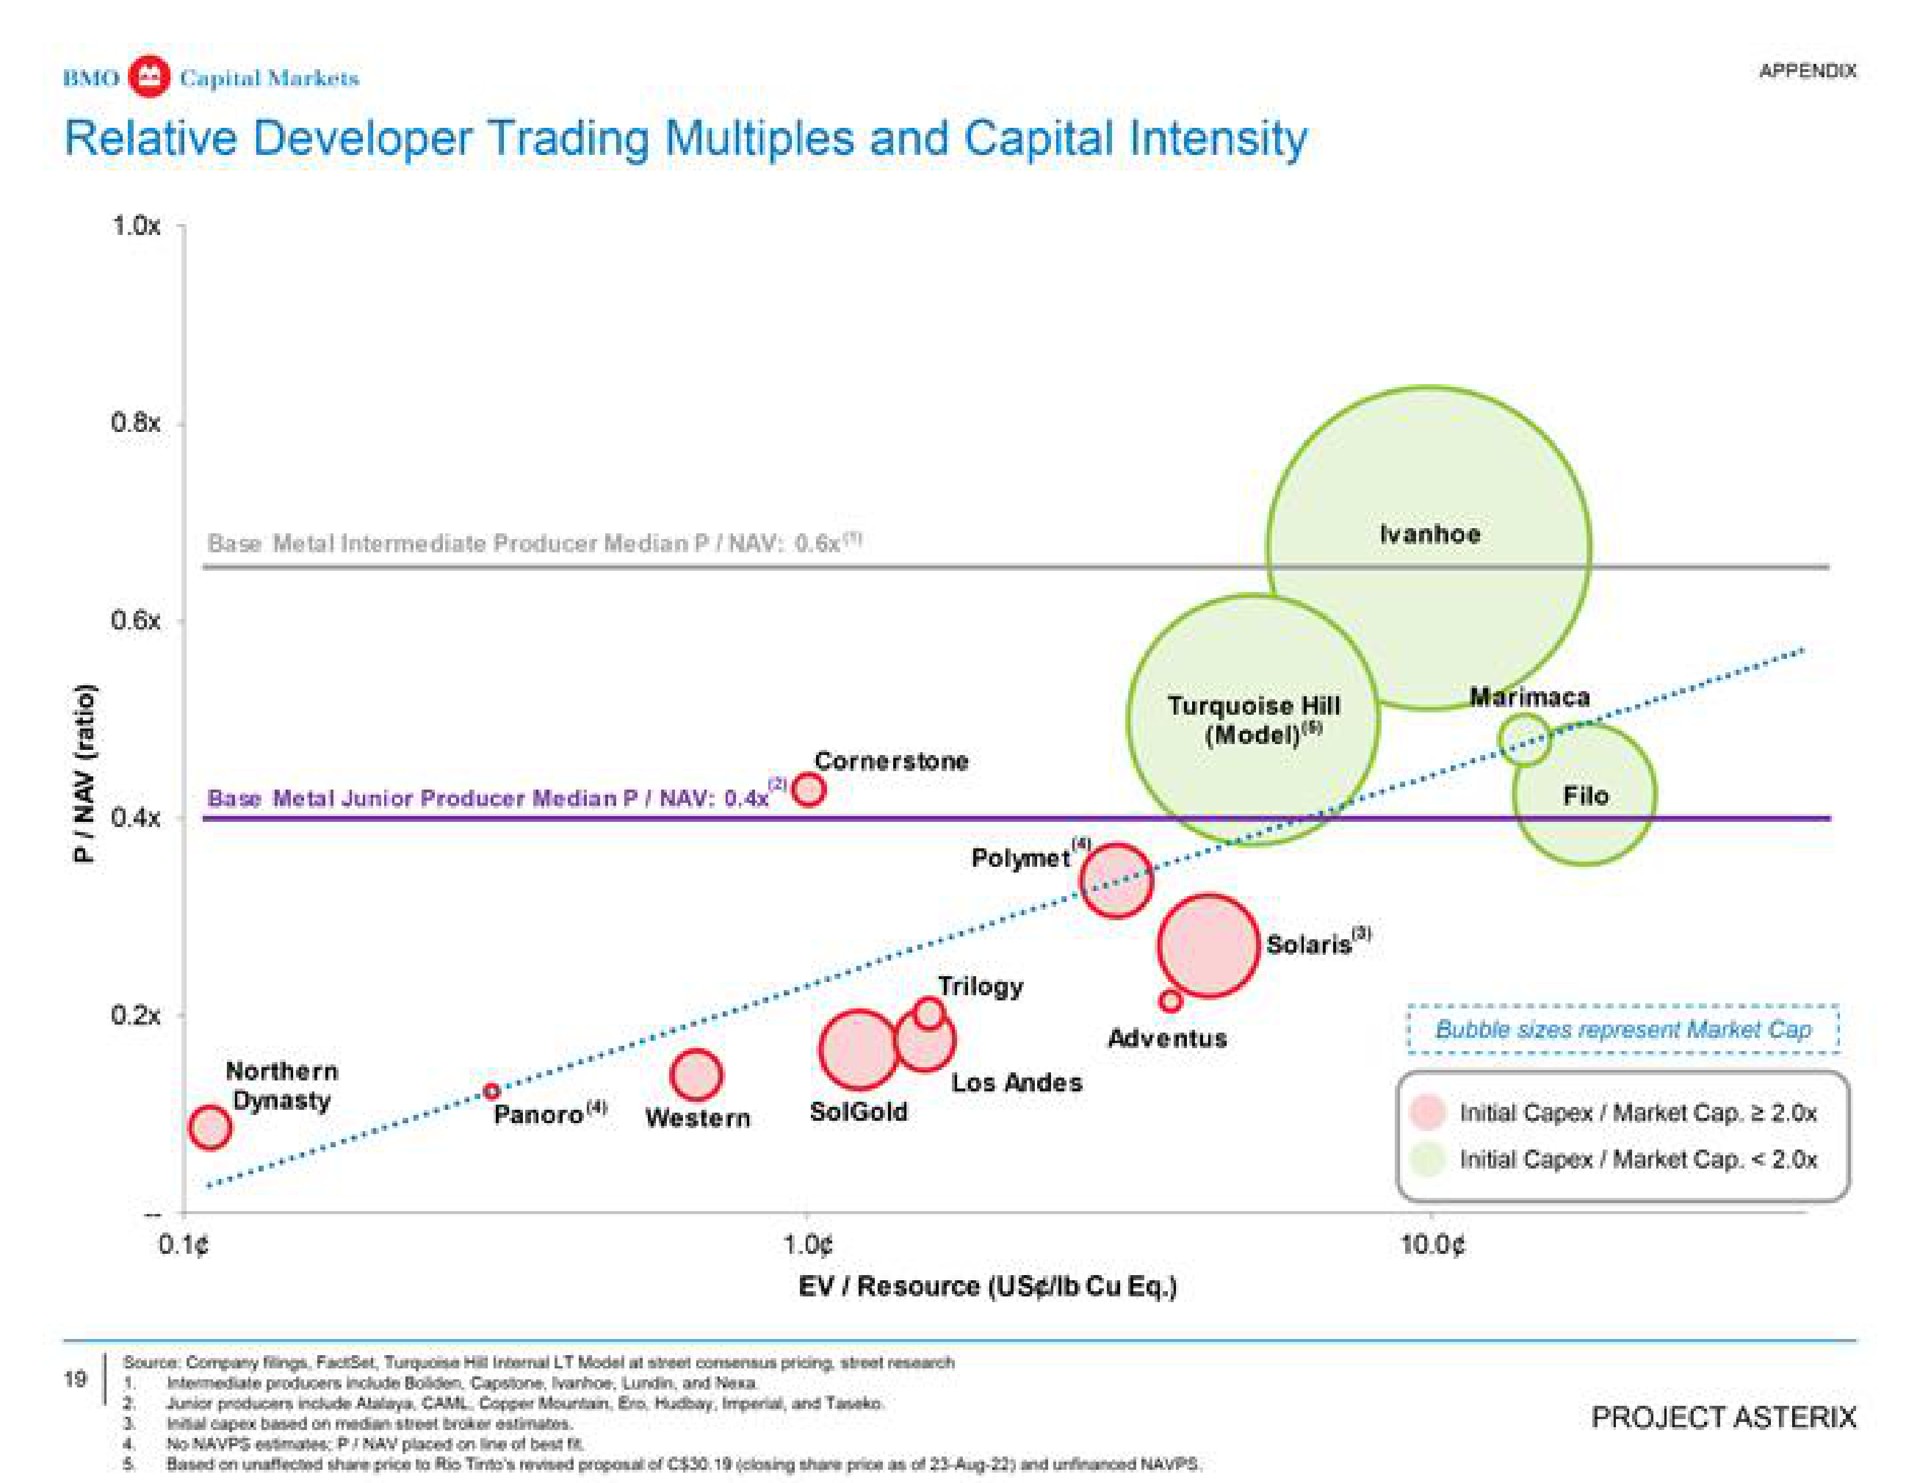 relative developer trading multiples and capital intensity | BMO Capital Markets